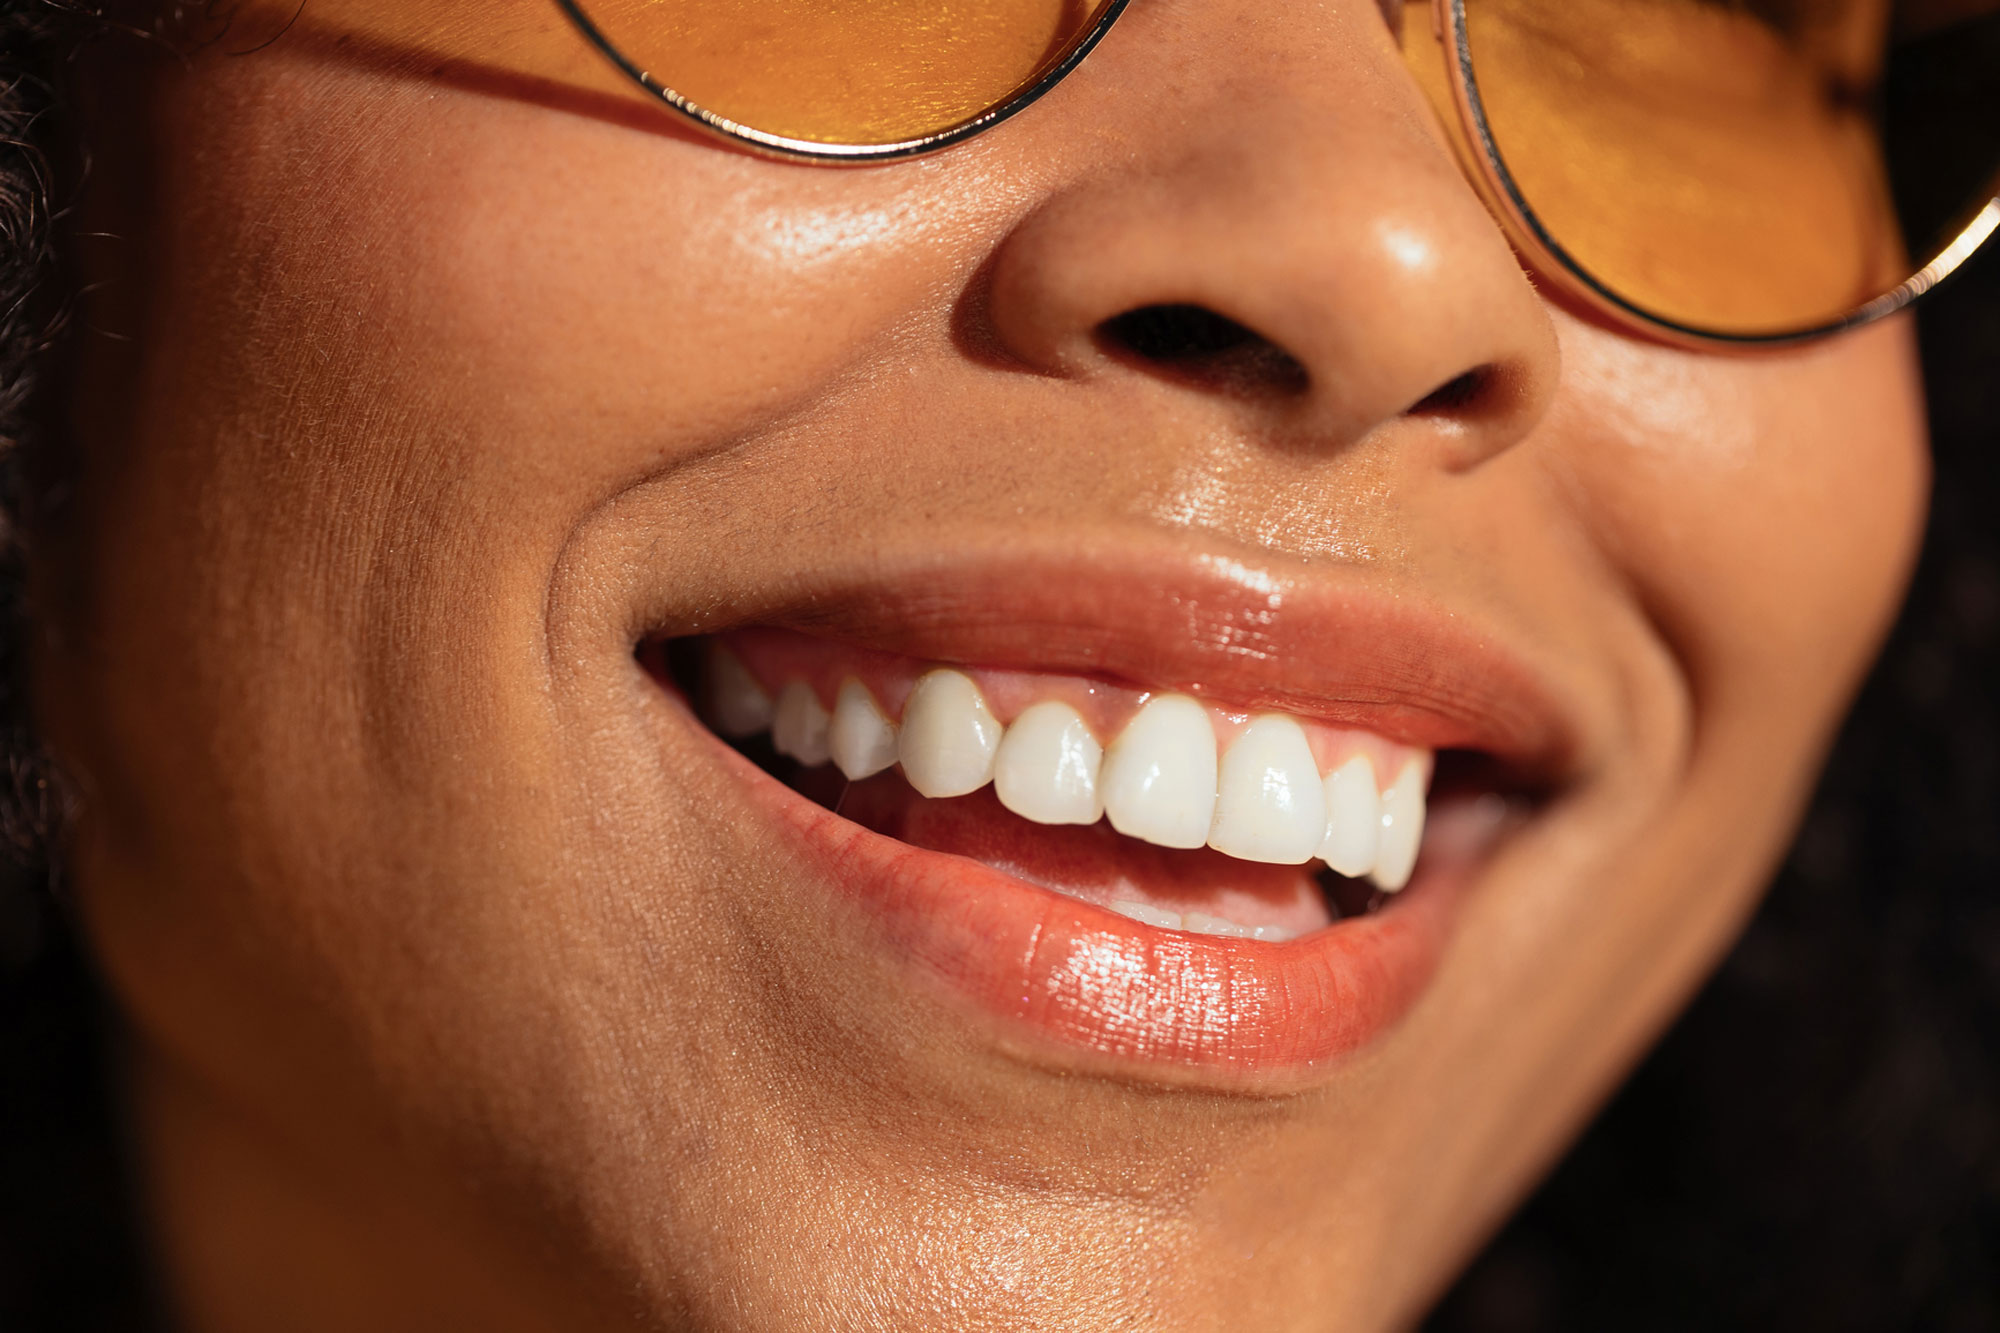 close up of woman with glasses smiling